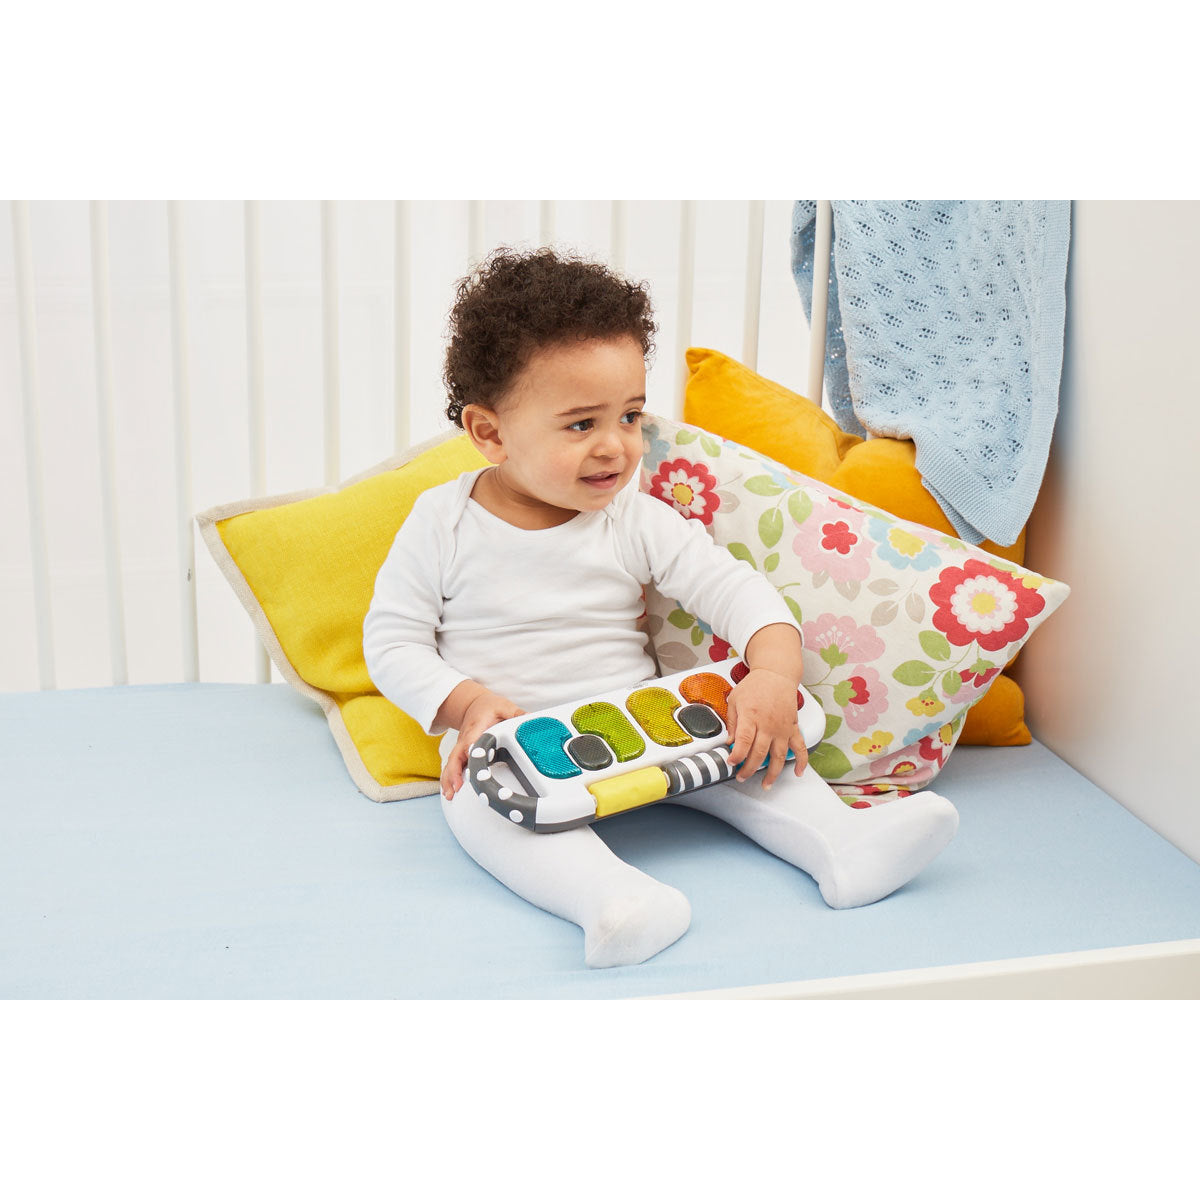 Little Senses Baby Carry-Along Piano